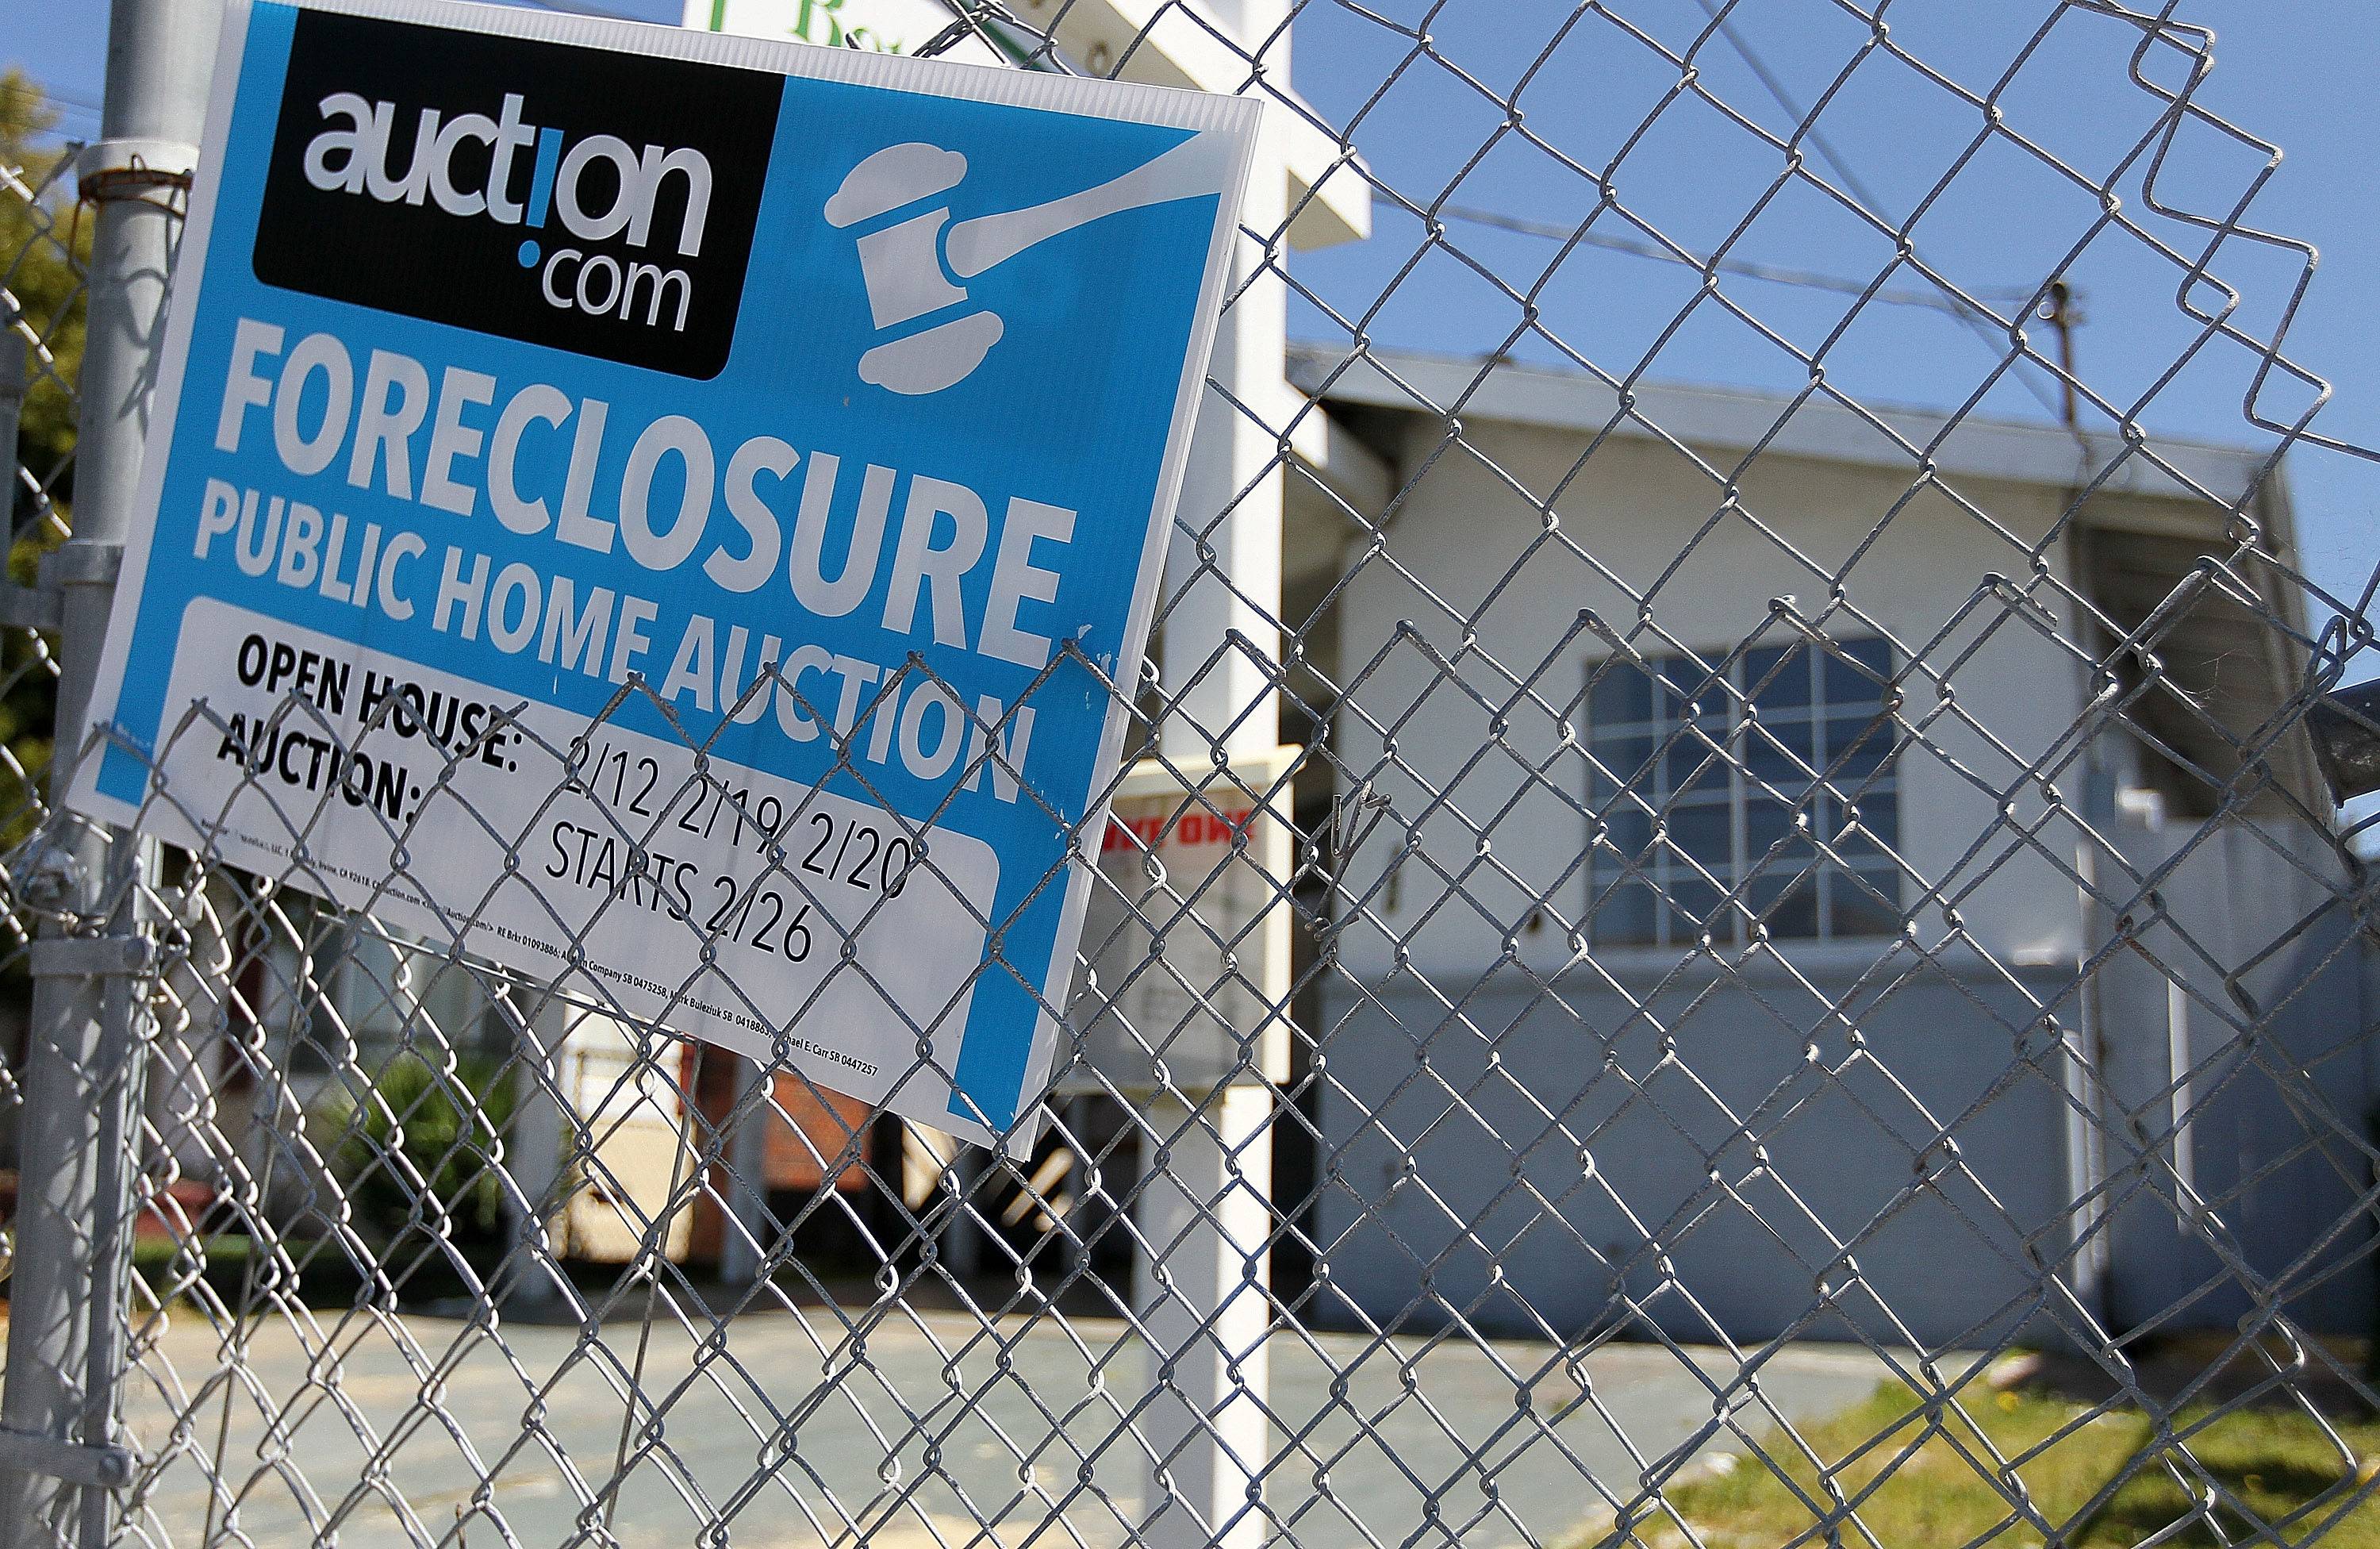 A Halt to Rising Foreclosures - Melanie Campbell says, &quot;Studies show that African-Americans have suffered disproportionately from foreclosures due to racially discriminatory lending practices. It’s time we slow this downward slide.”&nbsp;\r(Photo: Justin Sullivan/Getty Images)